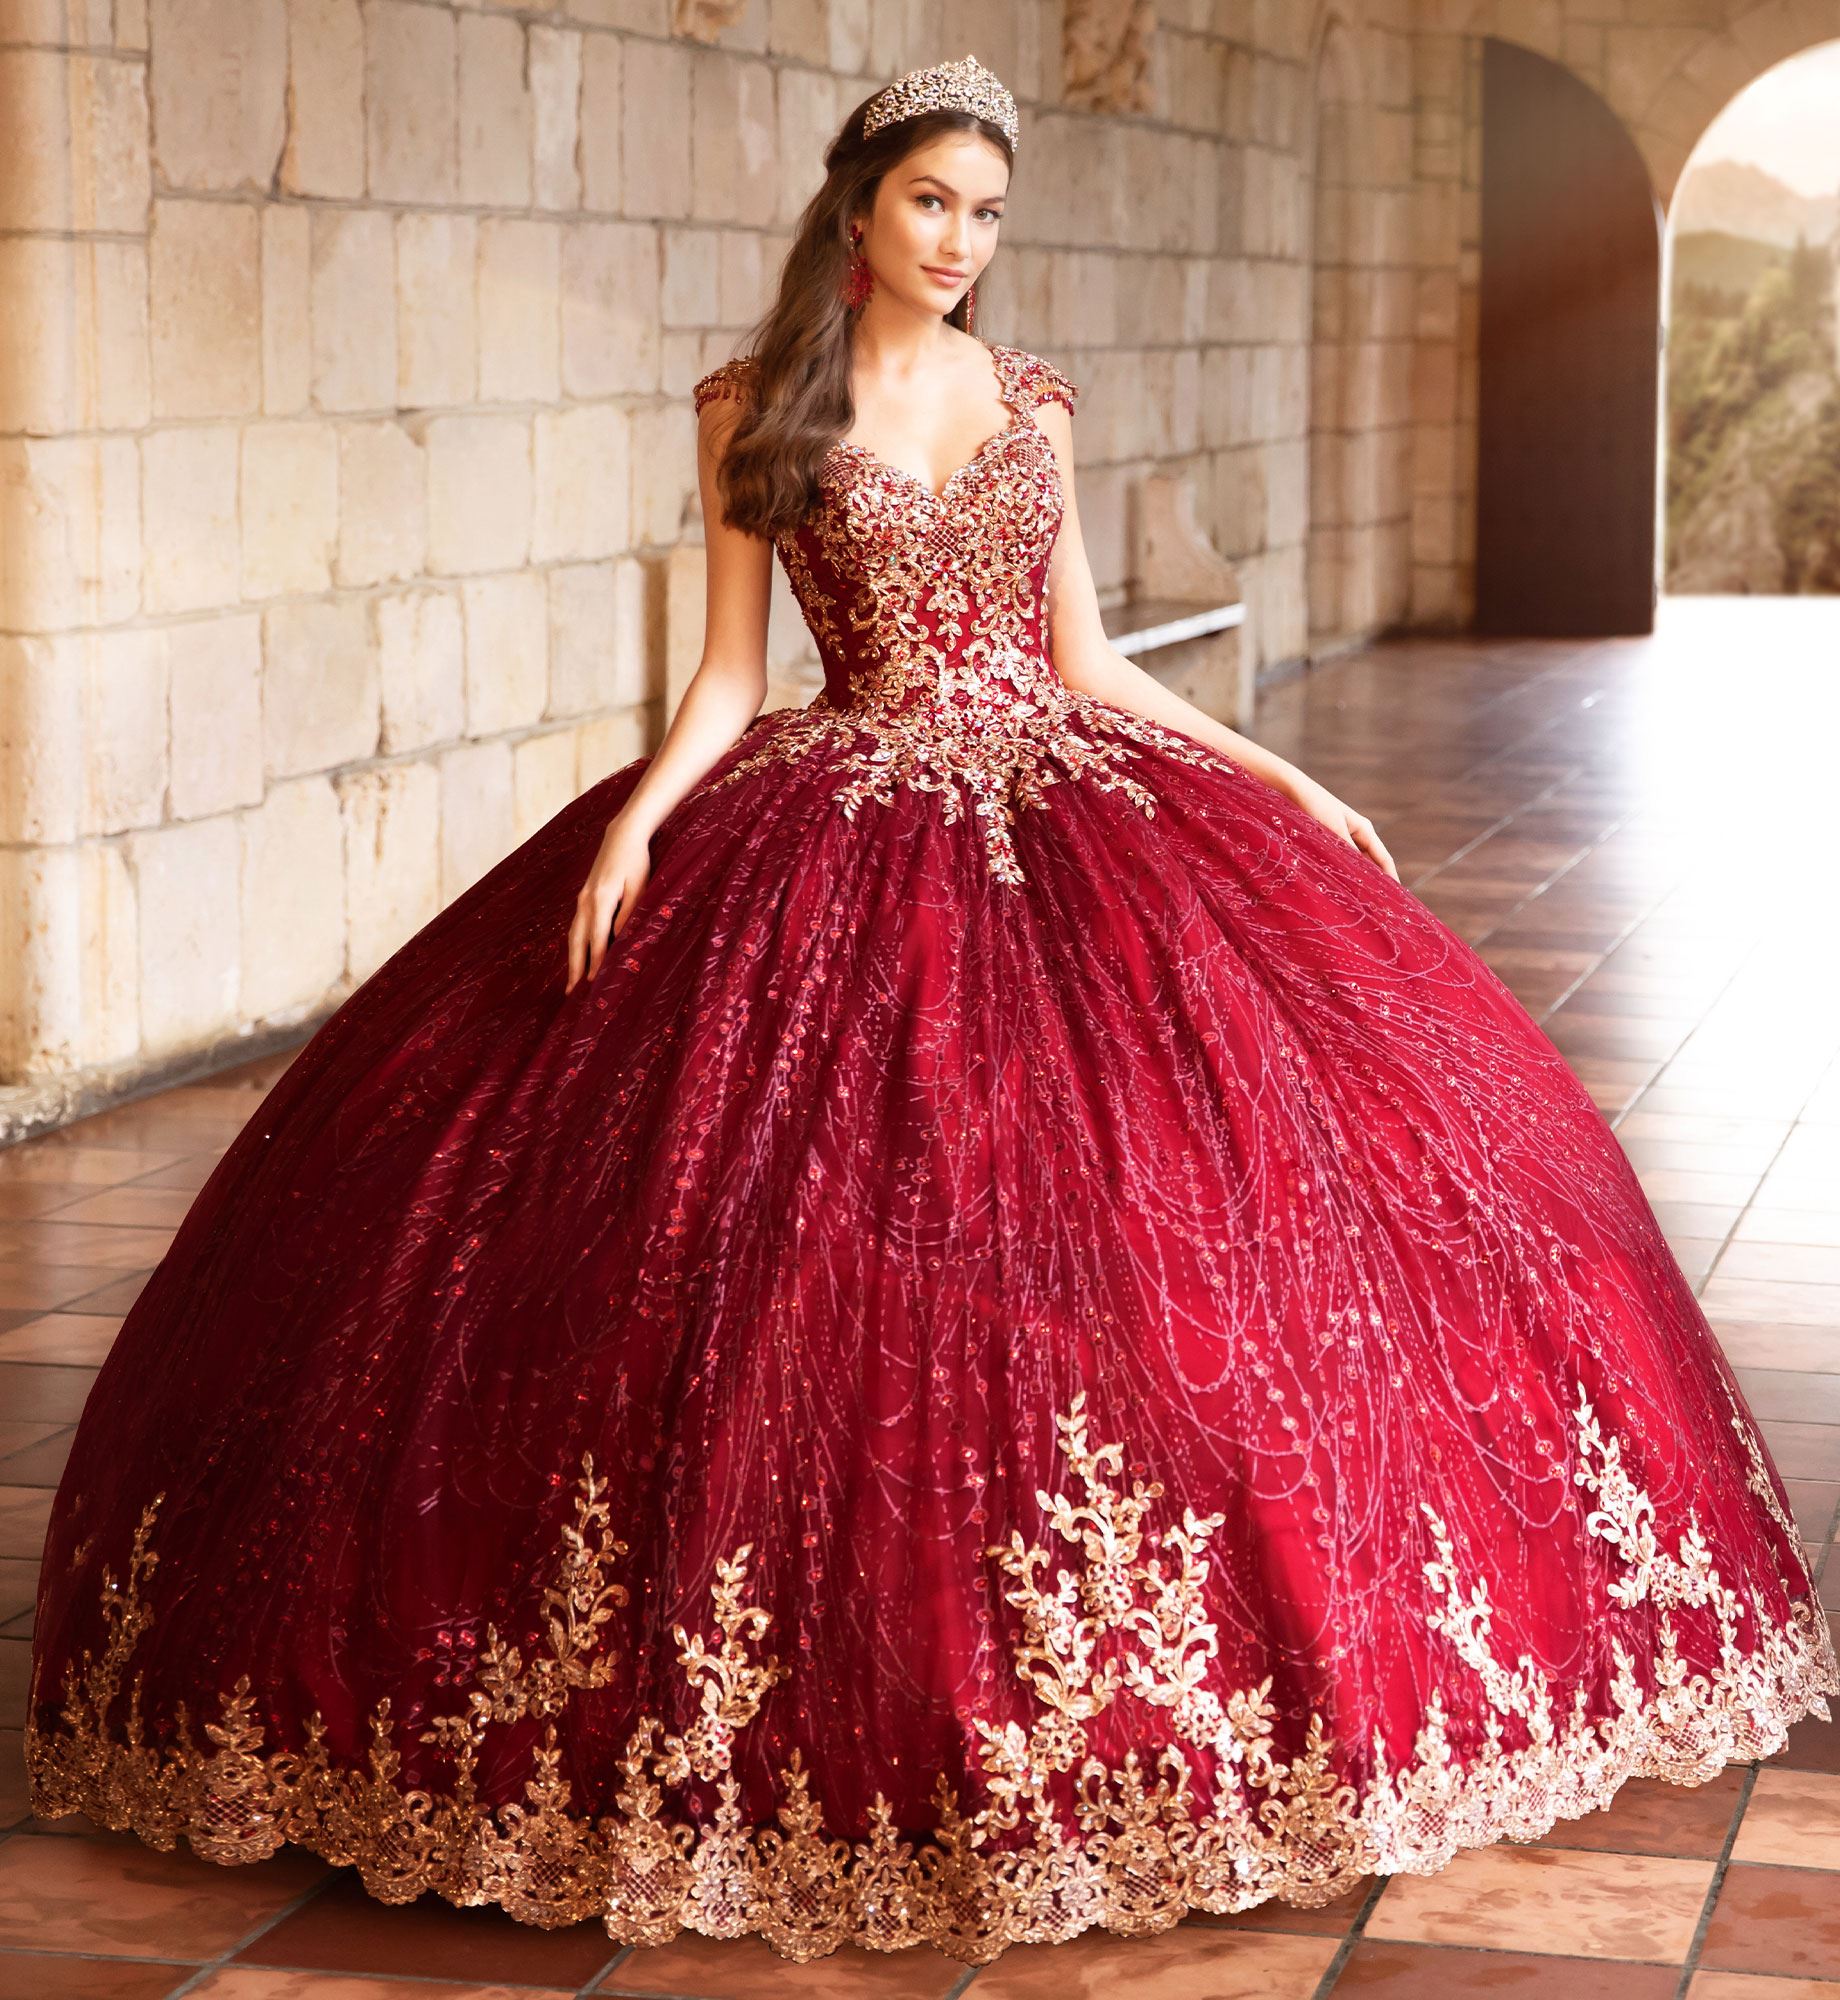 Brunette model in wine red and gold quinceañera dress